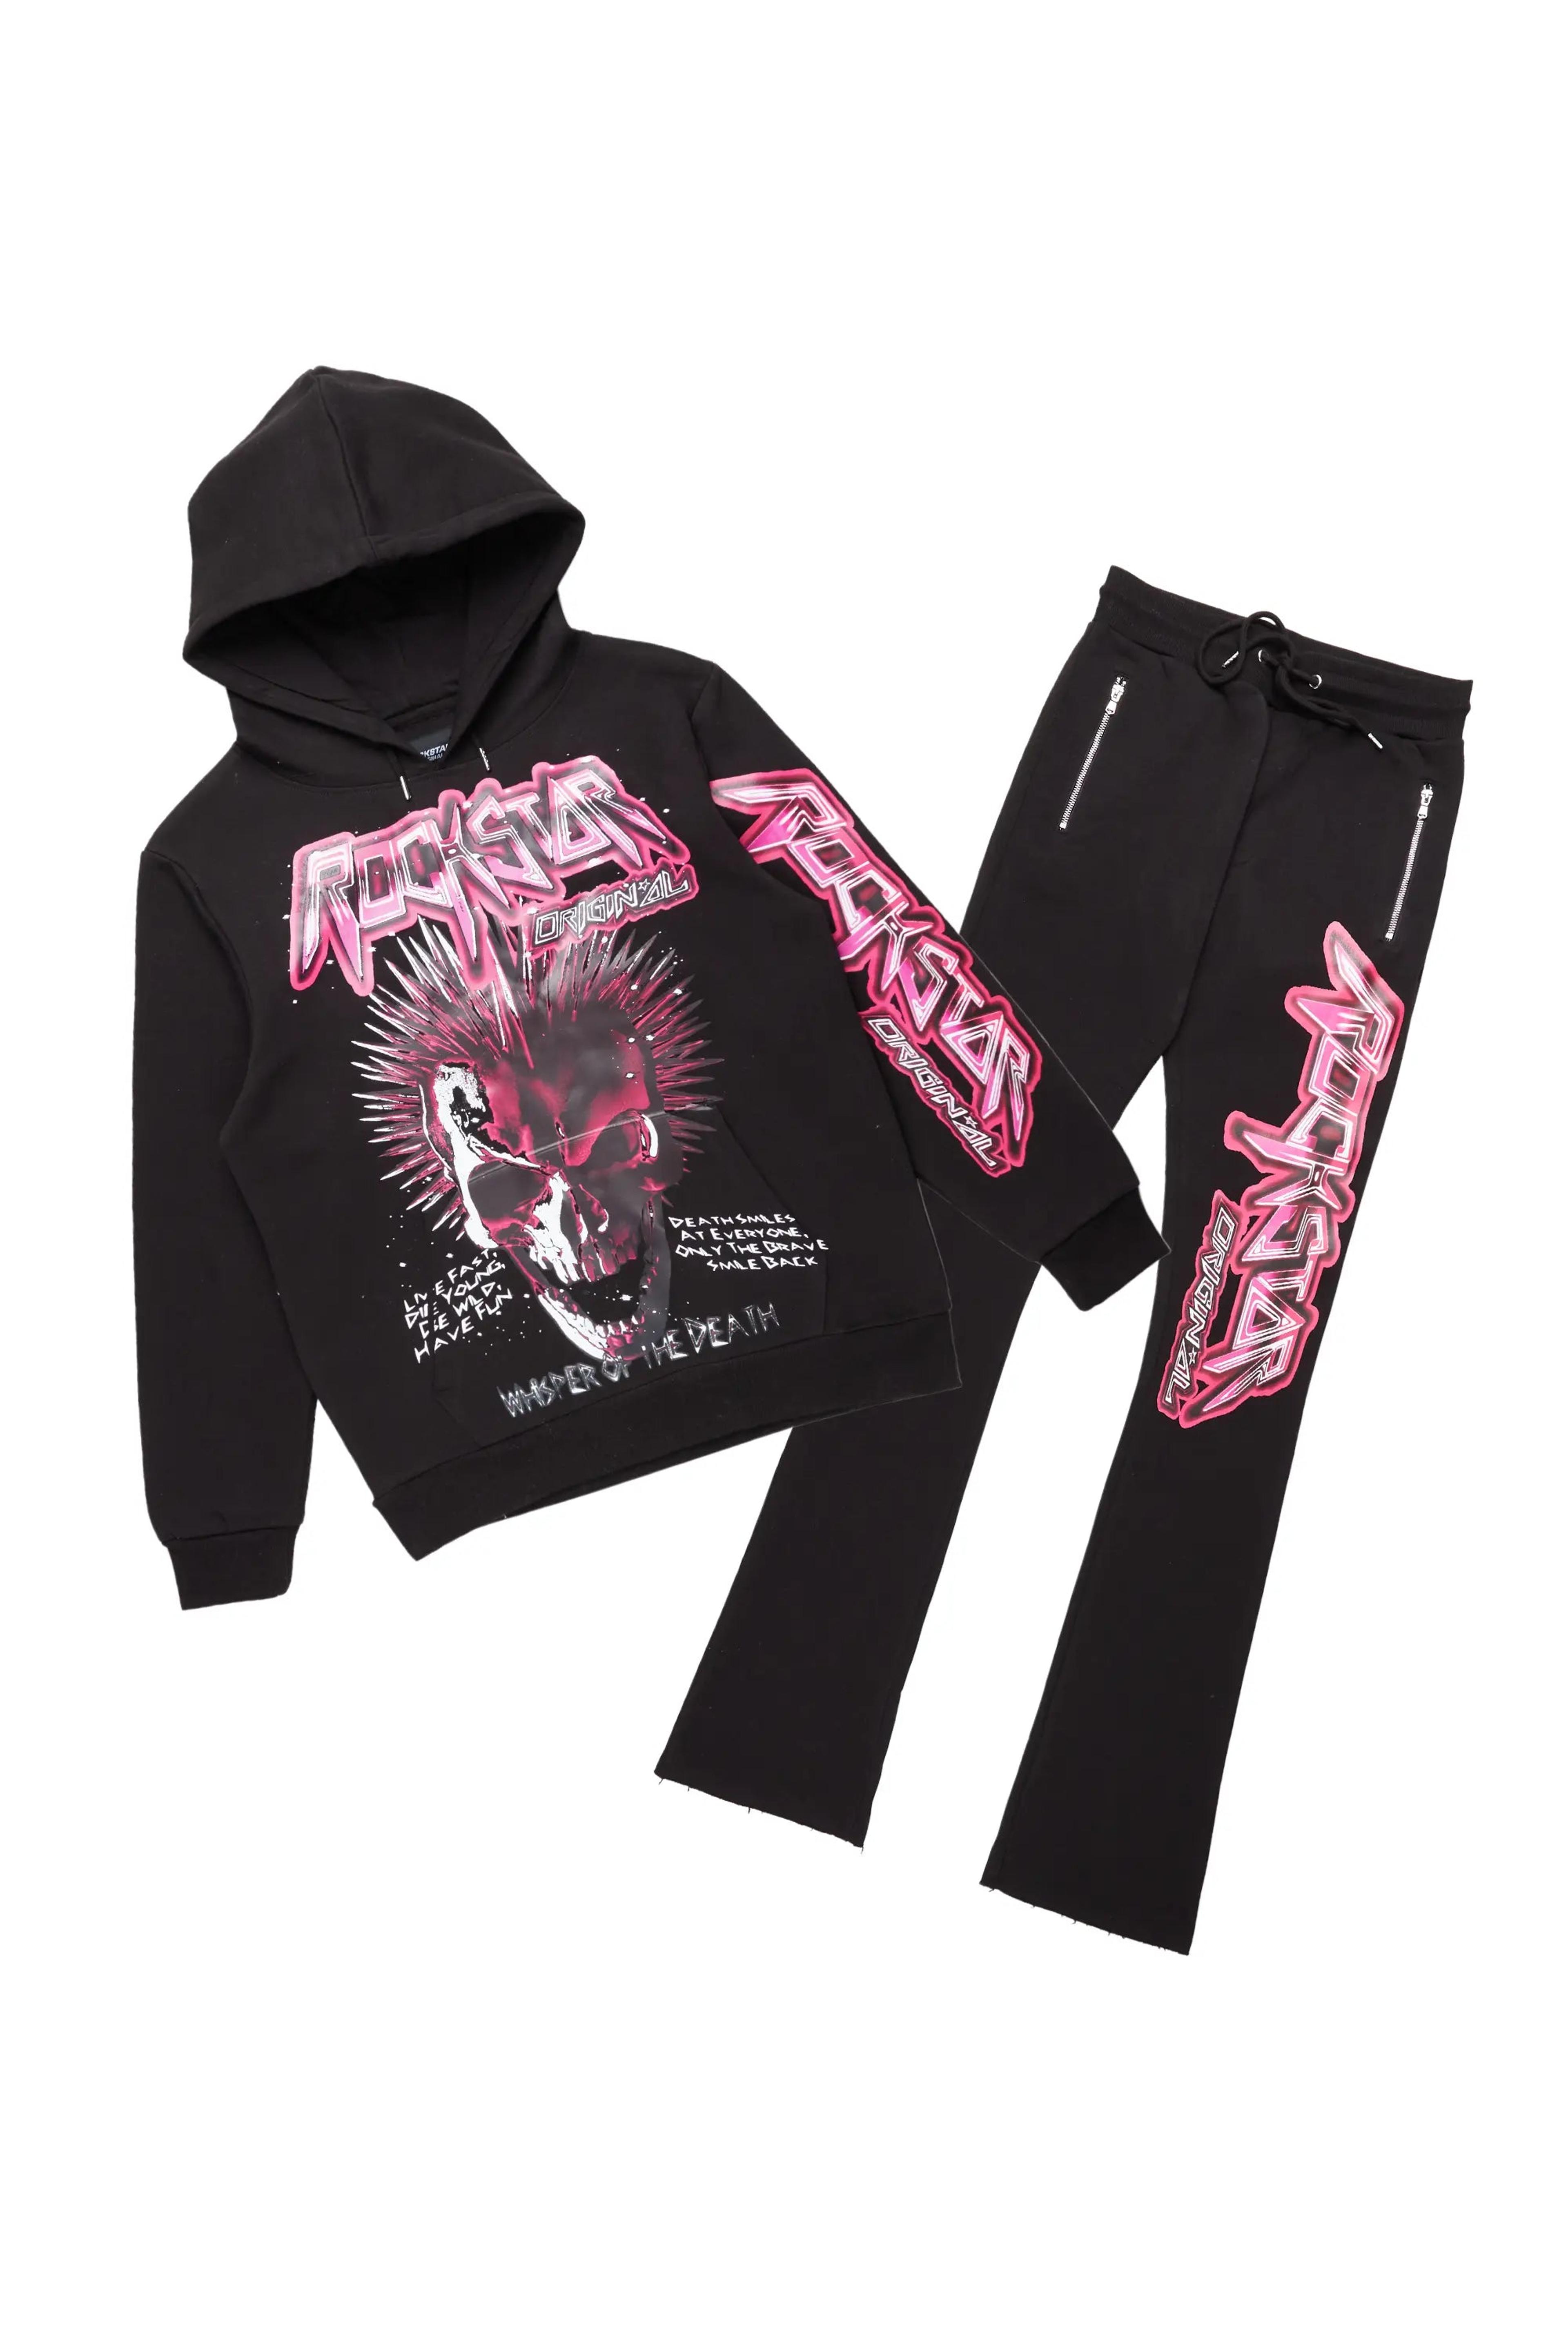 Alternate View 1 of Obern Black/Black Graphic Hoodie/Stacked Flare Pant Track Set